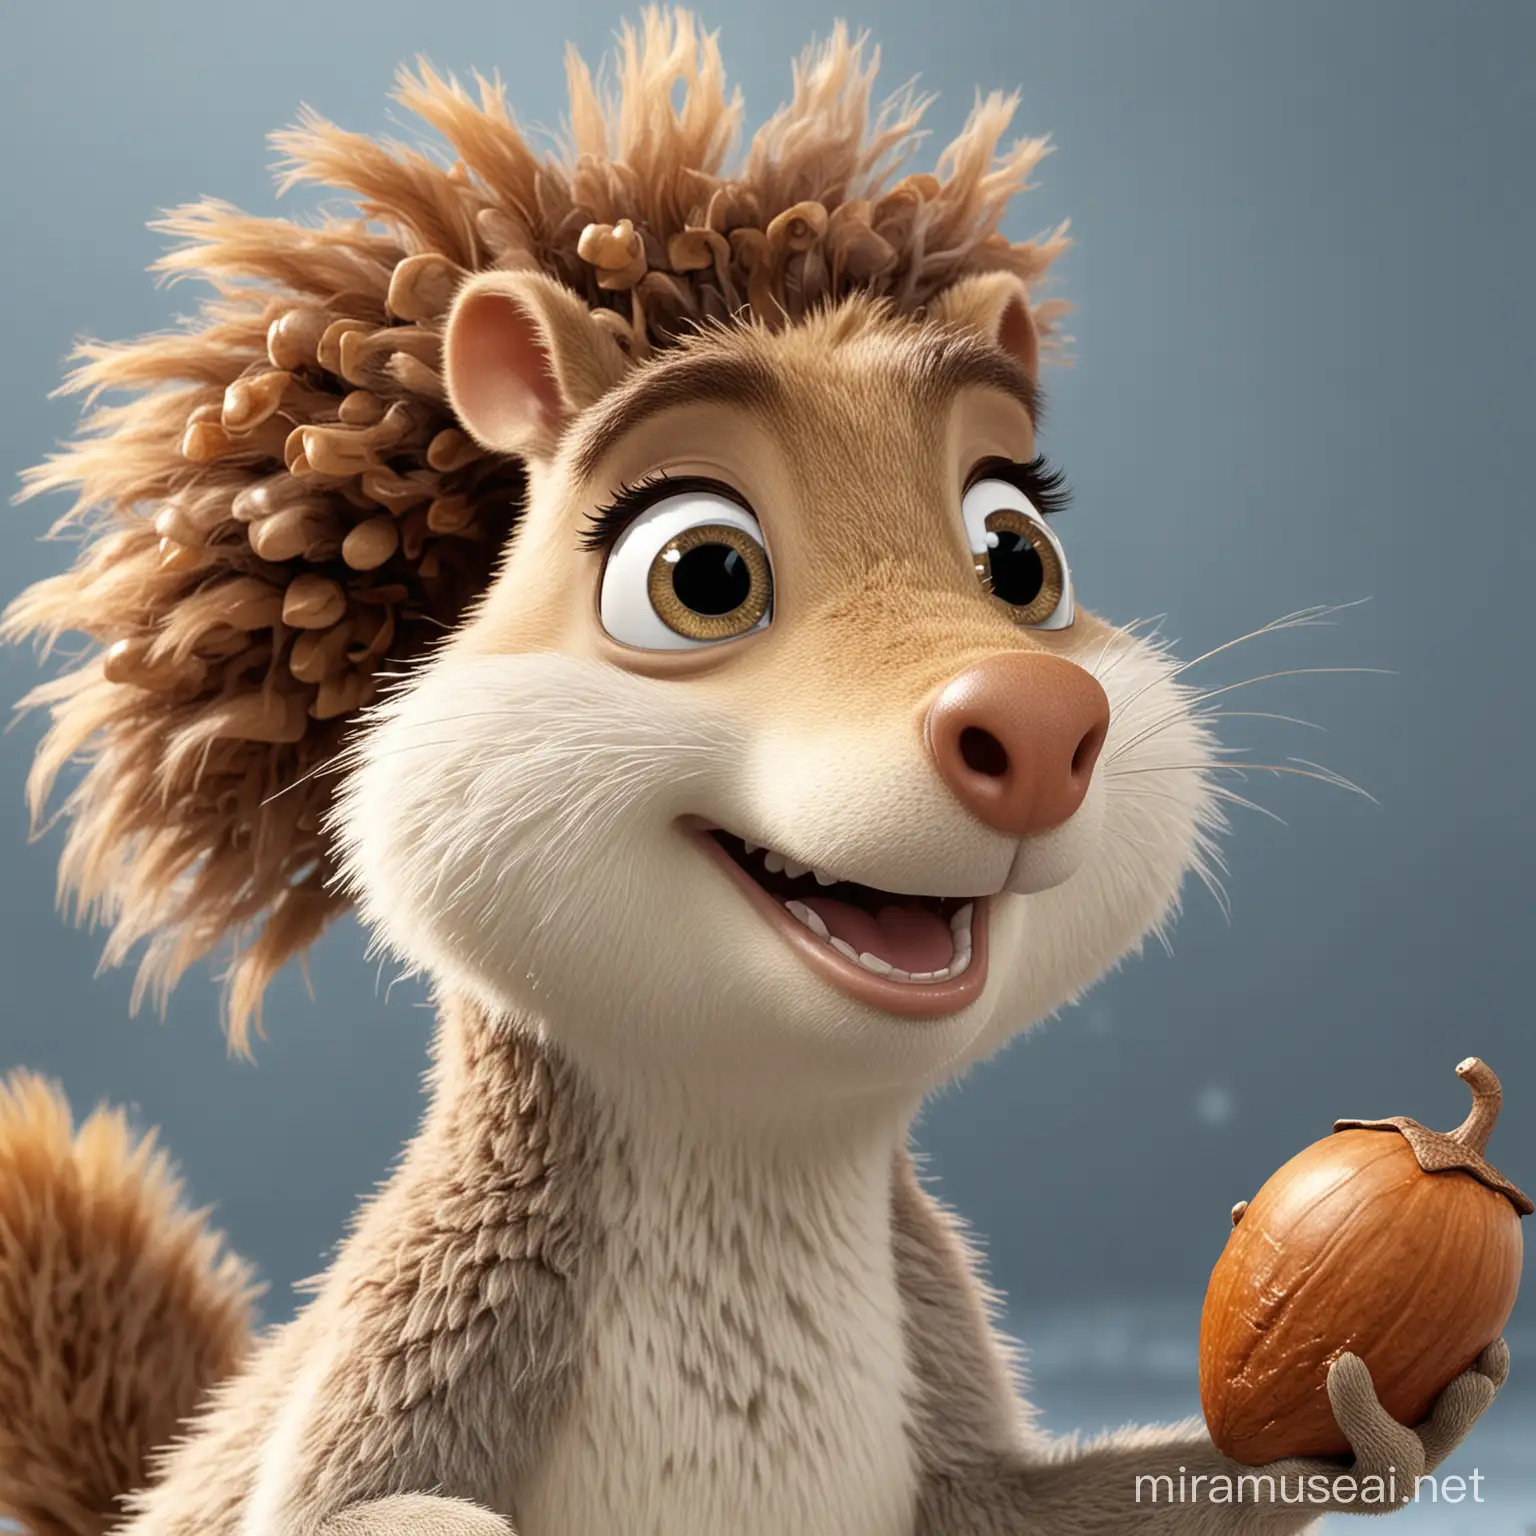 Scrat from Ice Age with Curly Female Hair Holding an Acorn